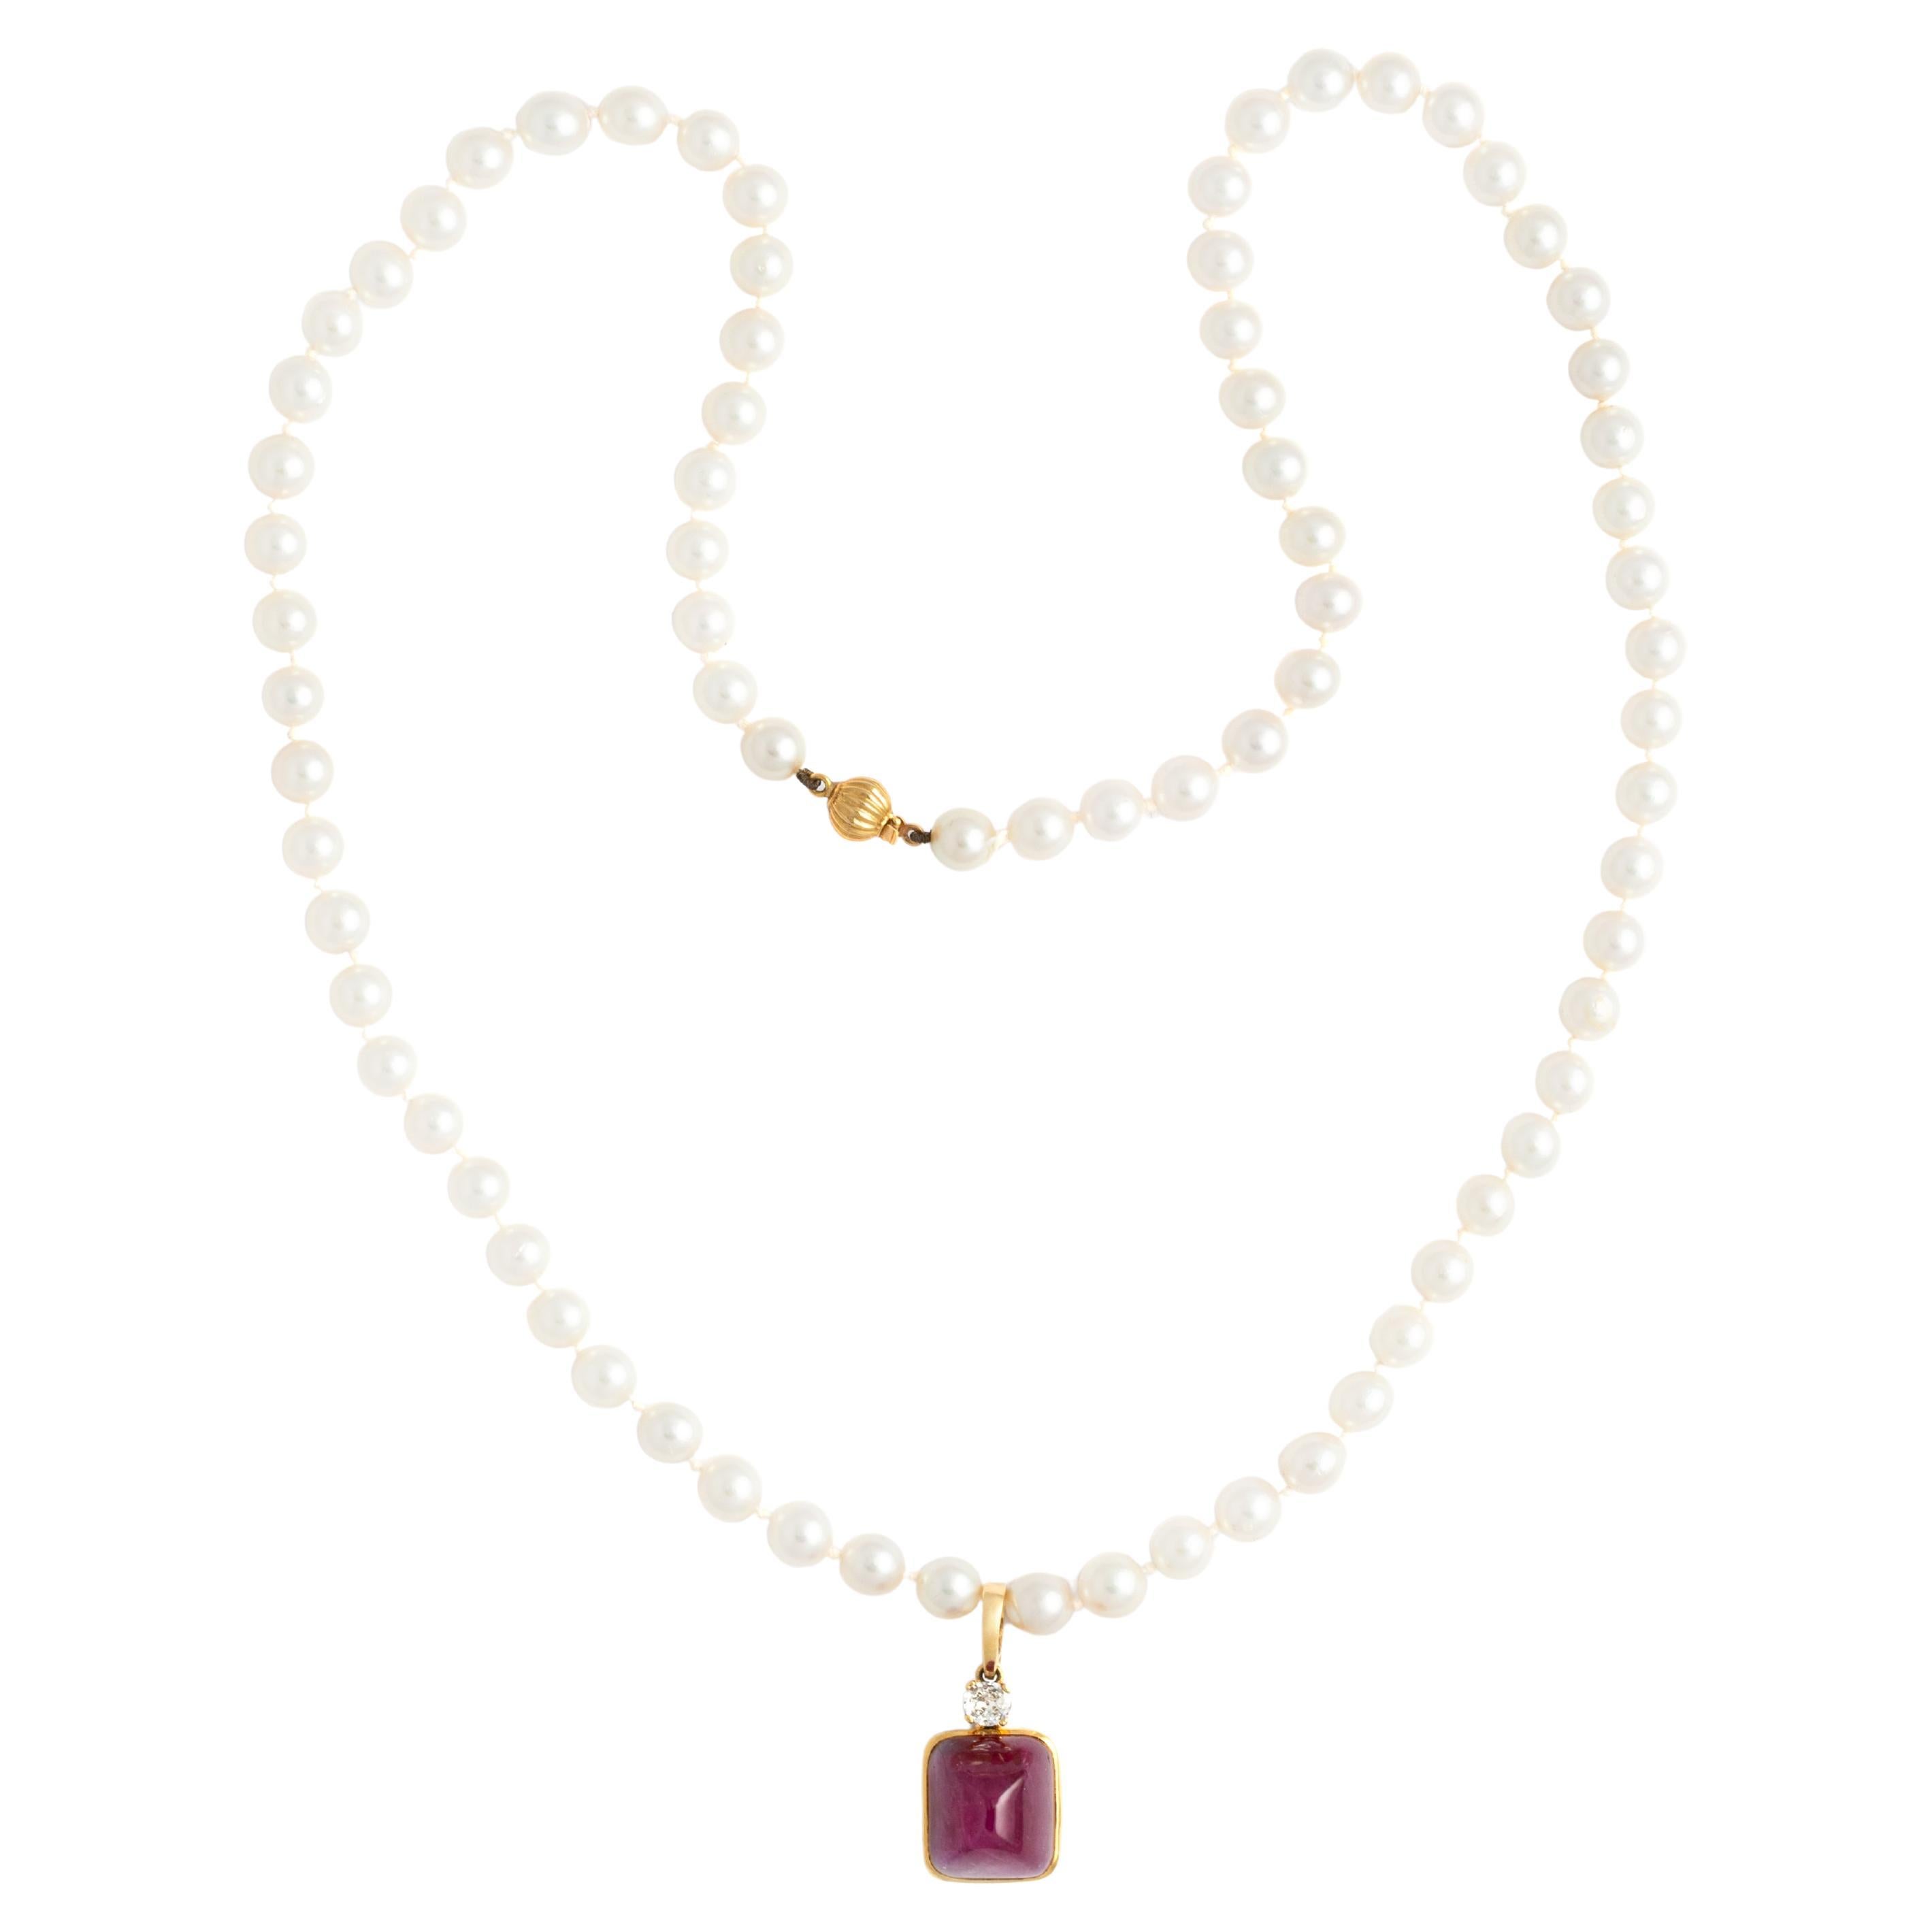 29.47 Carat Ruby and Pearl on Yellow Gold Necklace